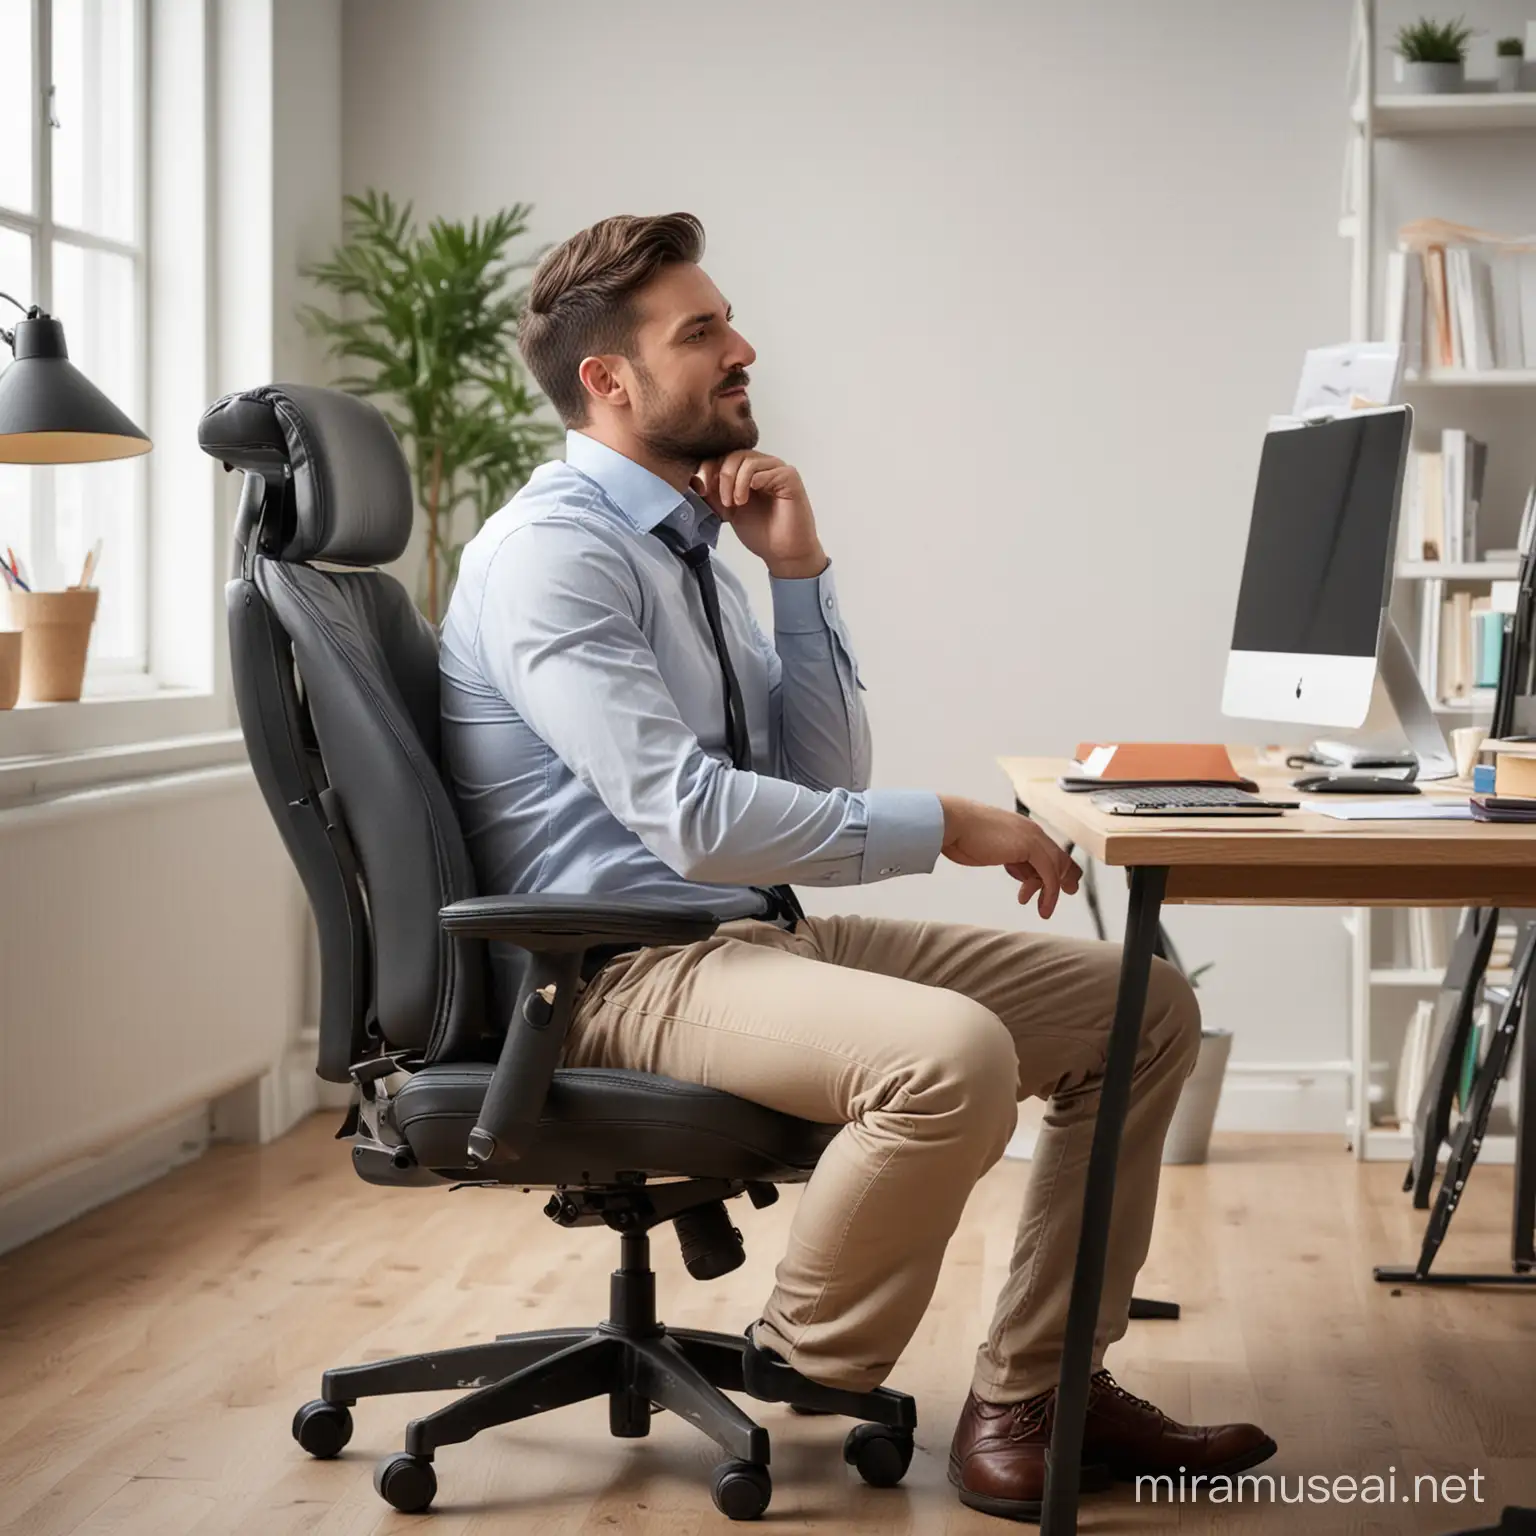 Man sits in office chair at desk in design studio, and is in pain due to sore backside 